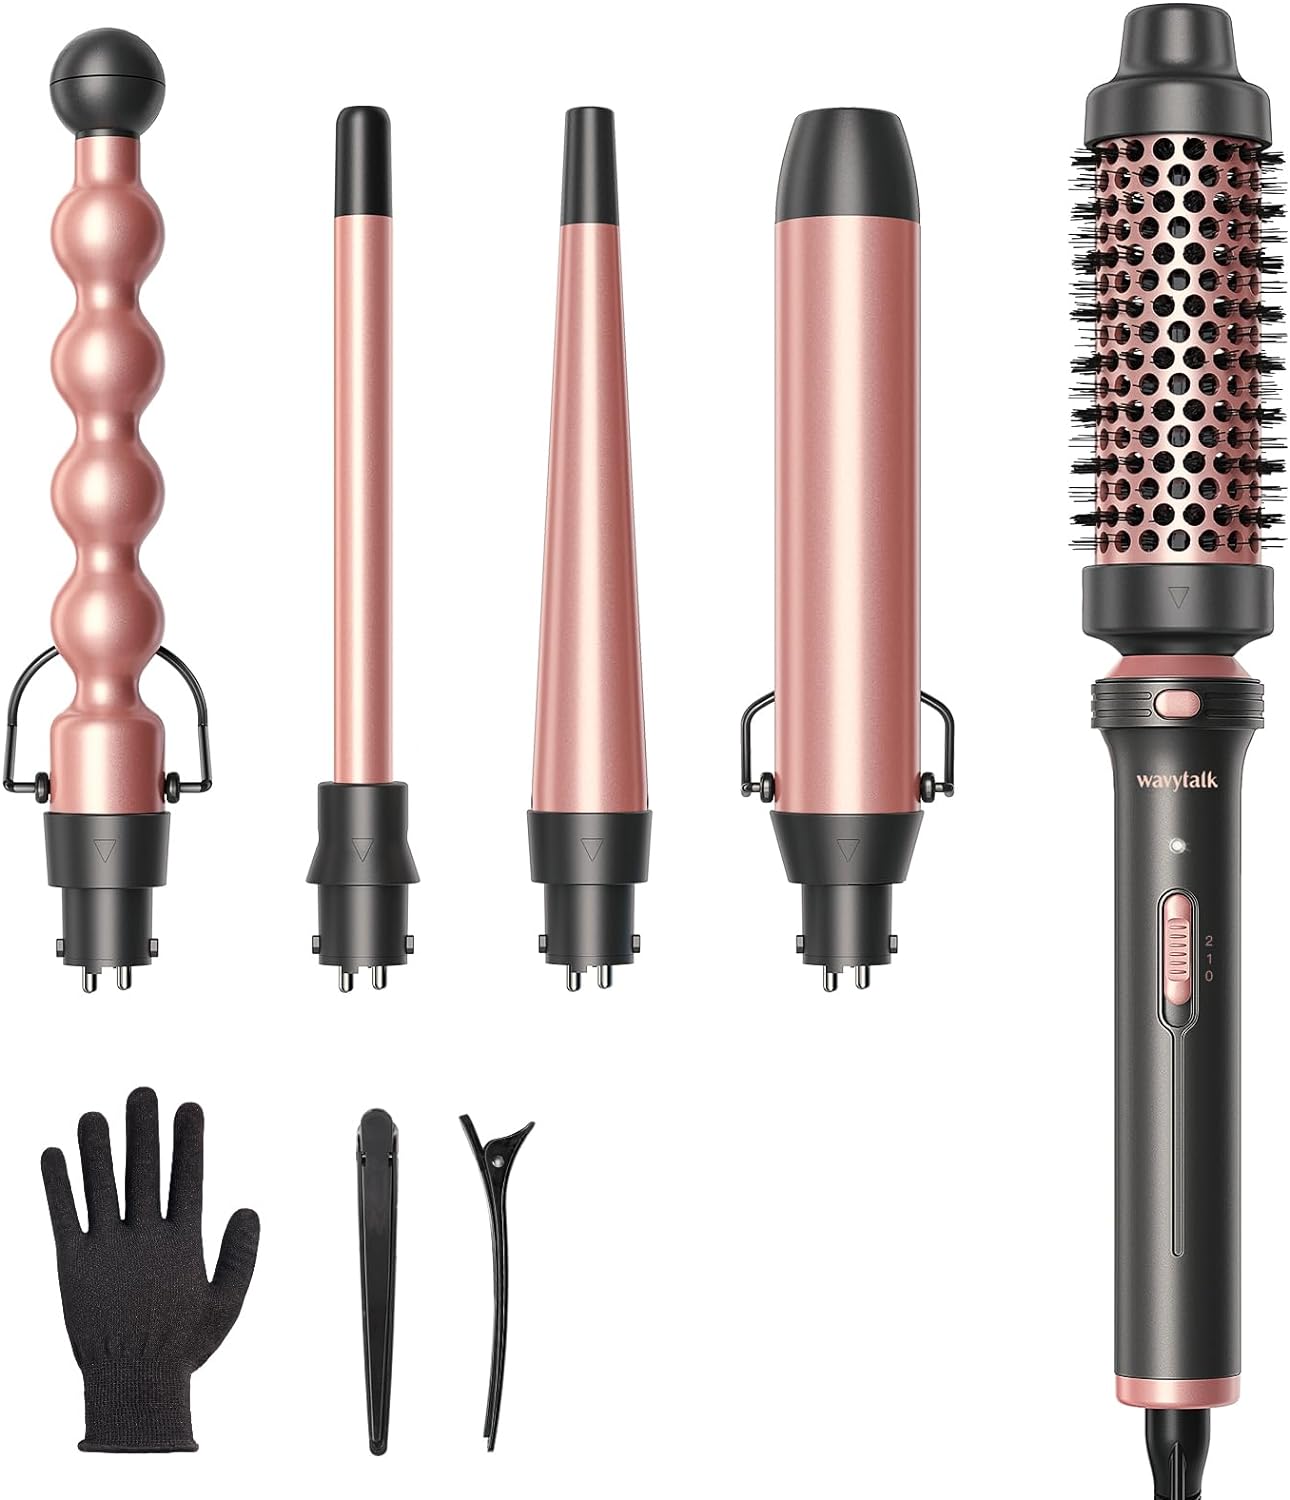 Wavytalk 5 in 1 Curling Iron,Curling Wand Set with Curling Brush and 4 Interchangeable Ceramic Curling Wand(0.5-1.25),Instant Heat Up,Include Heat Protective Glove & 2 Clips